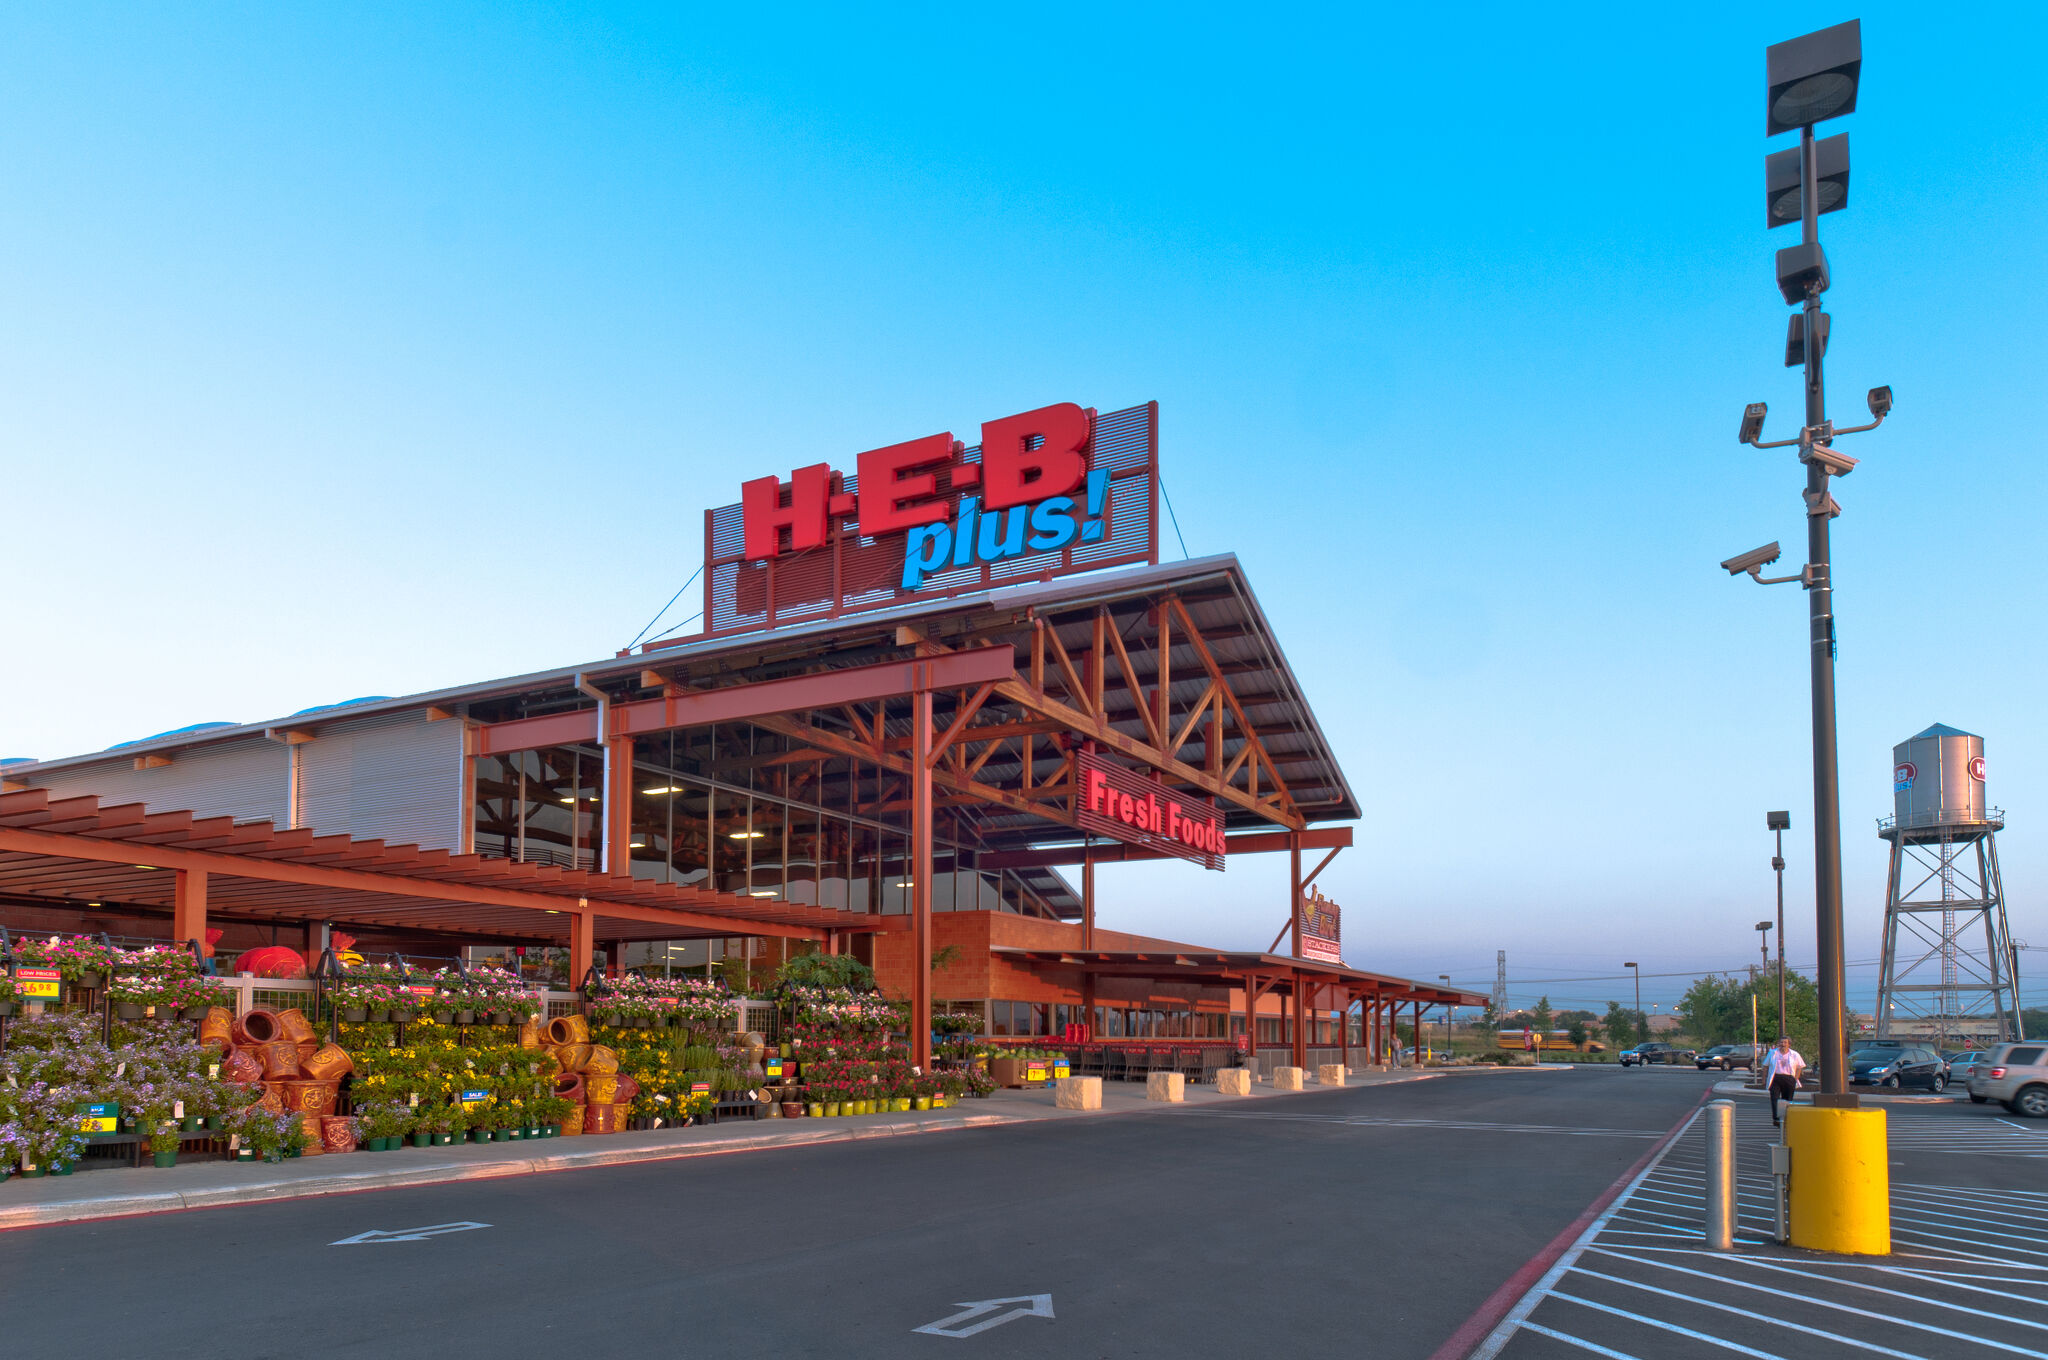 Top grocery in every state: H-E-B No. 1 in Texas